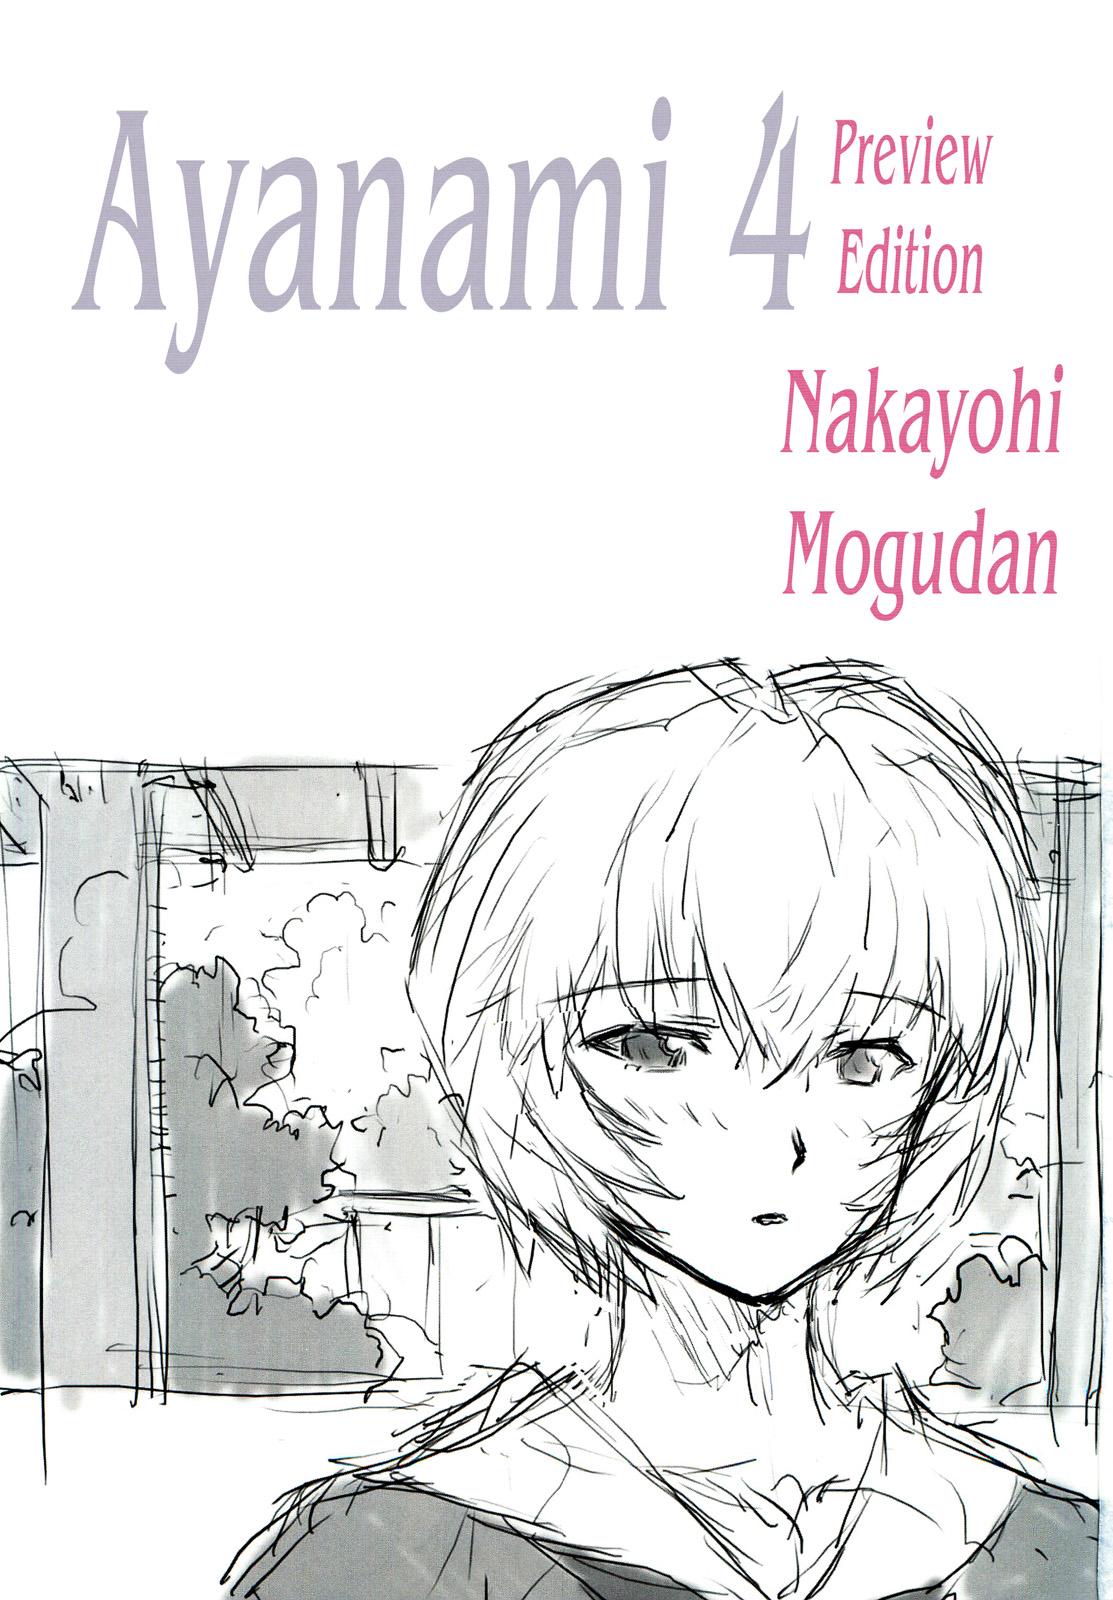 Office Sex Ayanami Dai 4 Kai Pure Han | Ayanami 4 Preview Edition - Neon genesis evangelion Goldenshower - Page 3